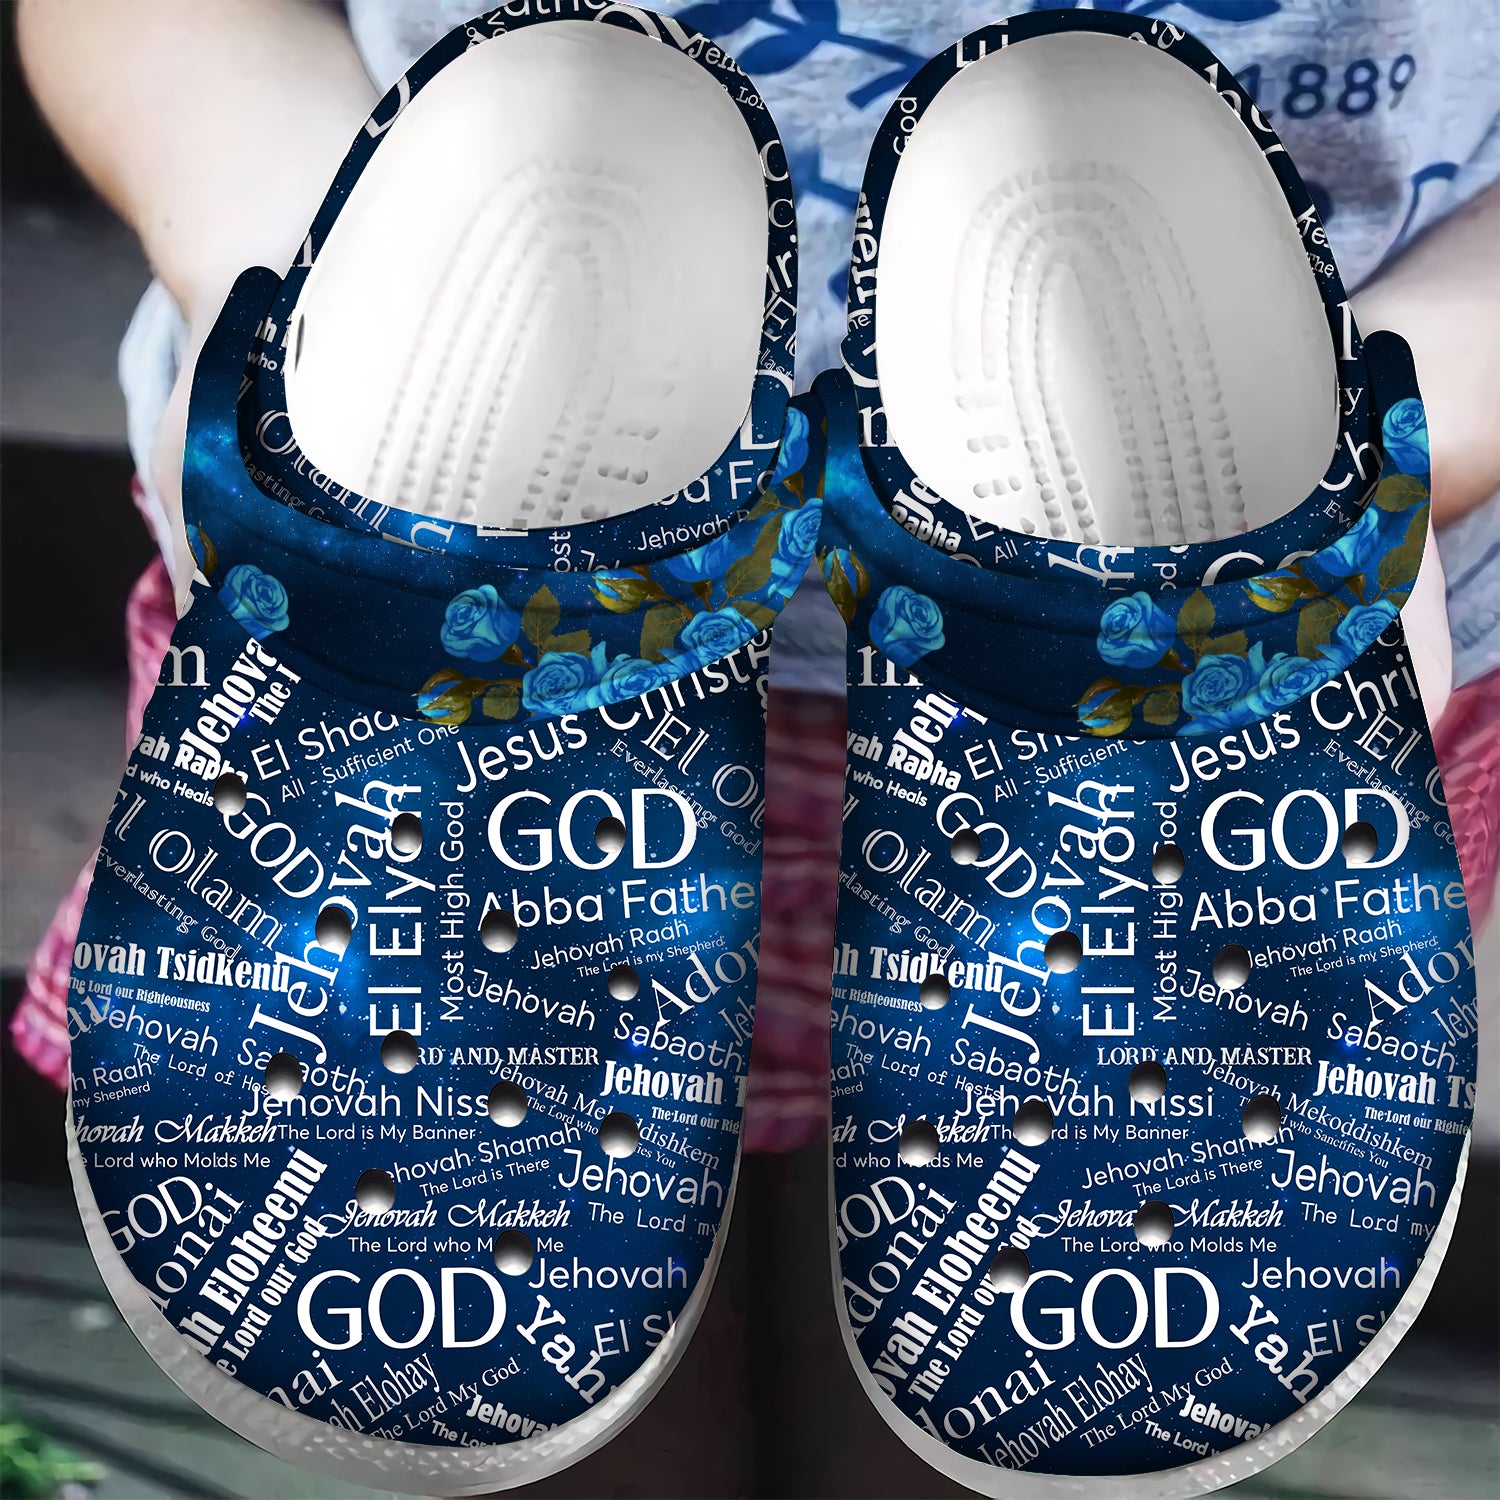 Lord Cover Me Jesus Christ God Abba Father Names Of God, Qoutes About Name Of God Clog Band